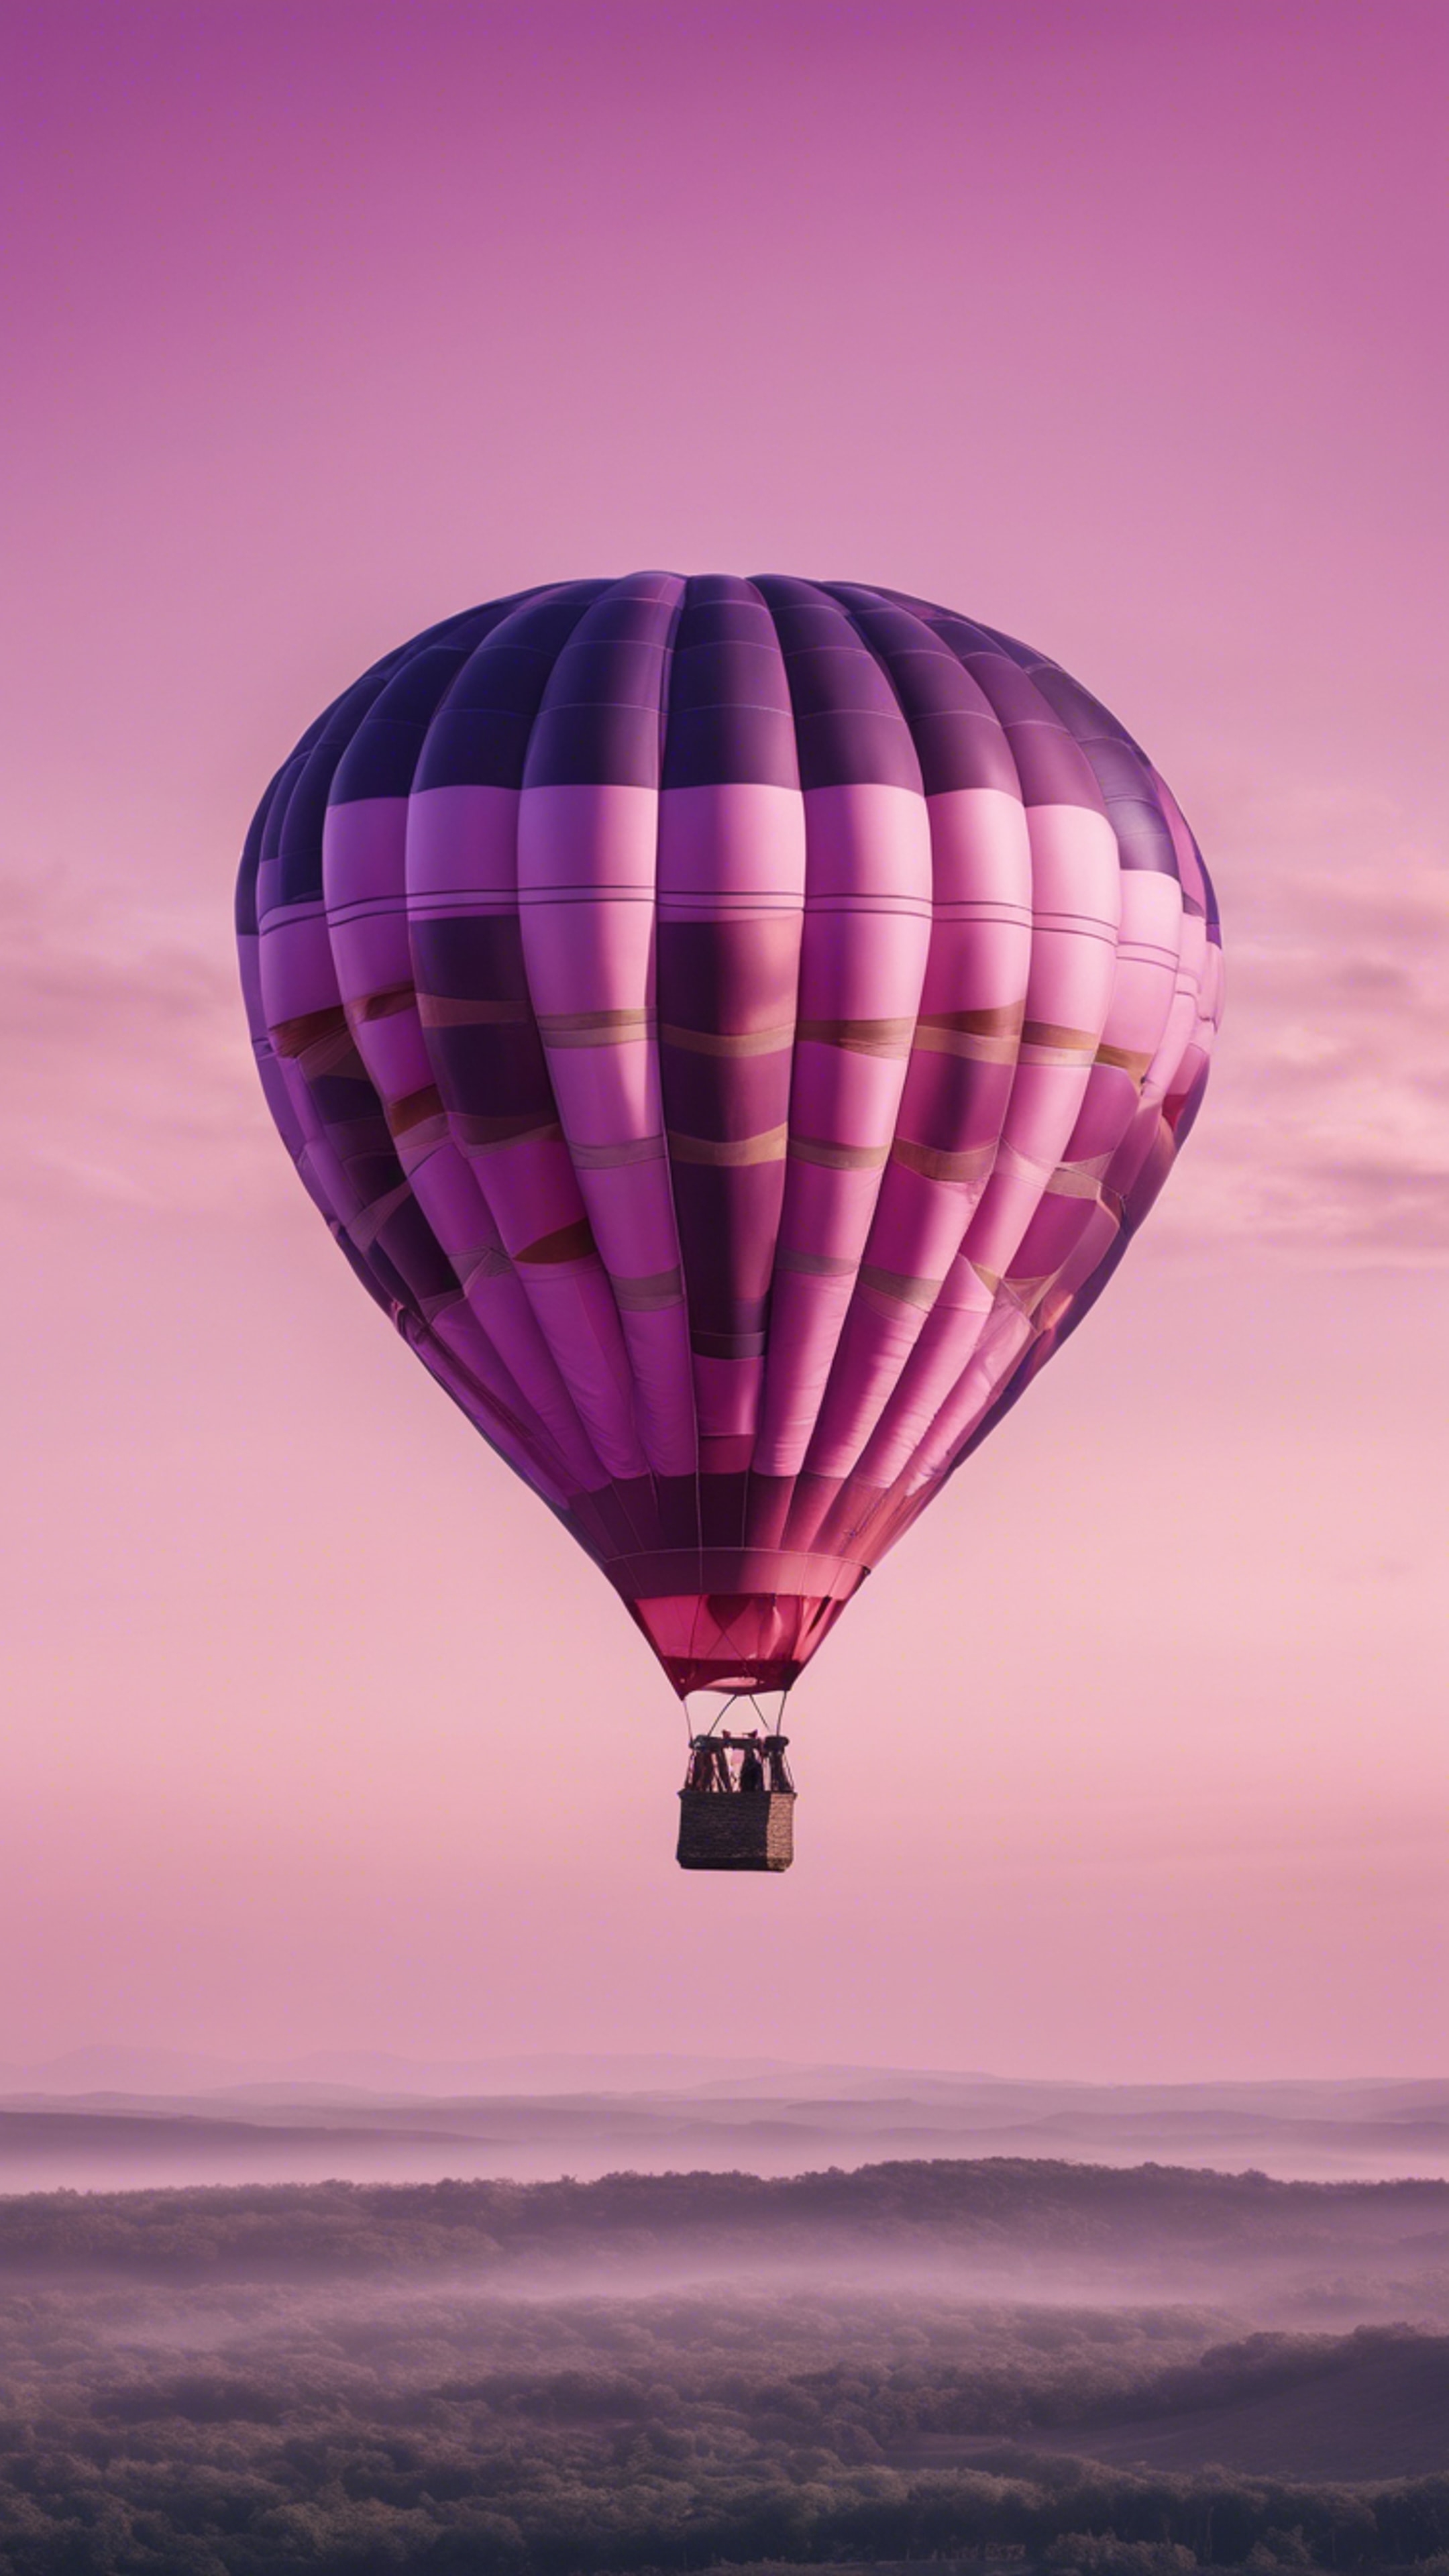 A pink and purple striped hot air balloon floating in a clear morning sky. Wallpaper[24bb758d911f4cfb8c8f]